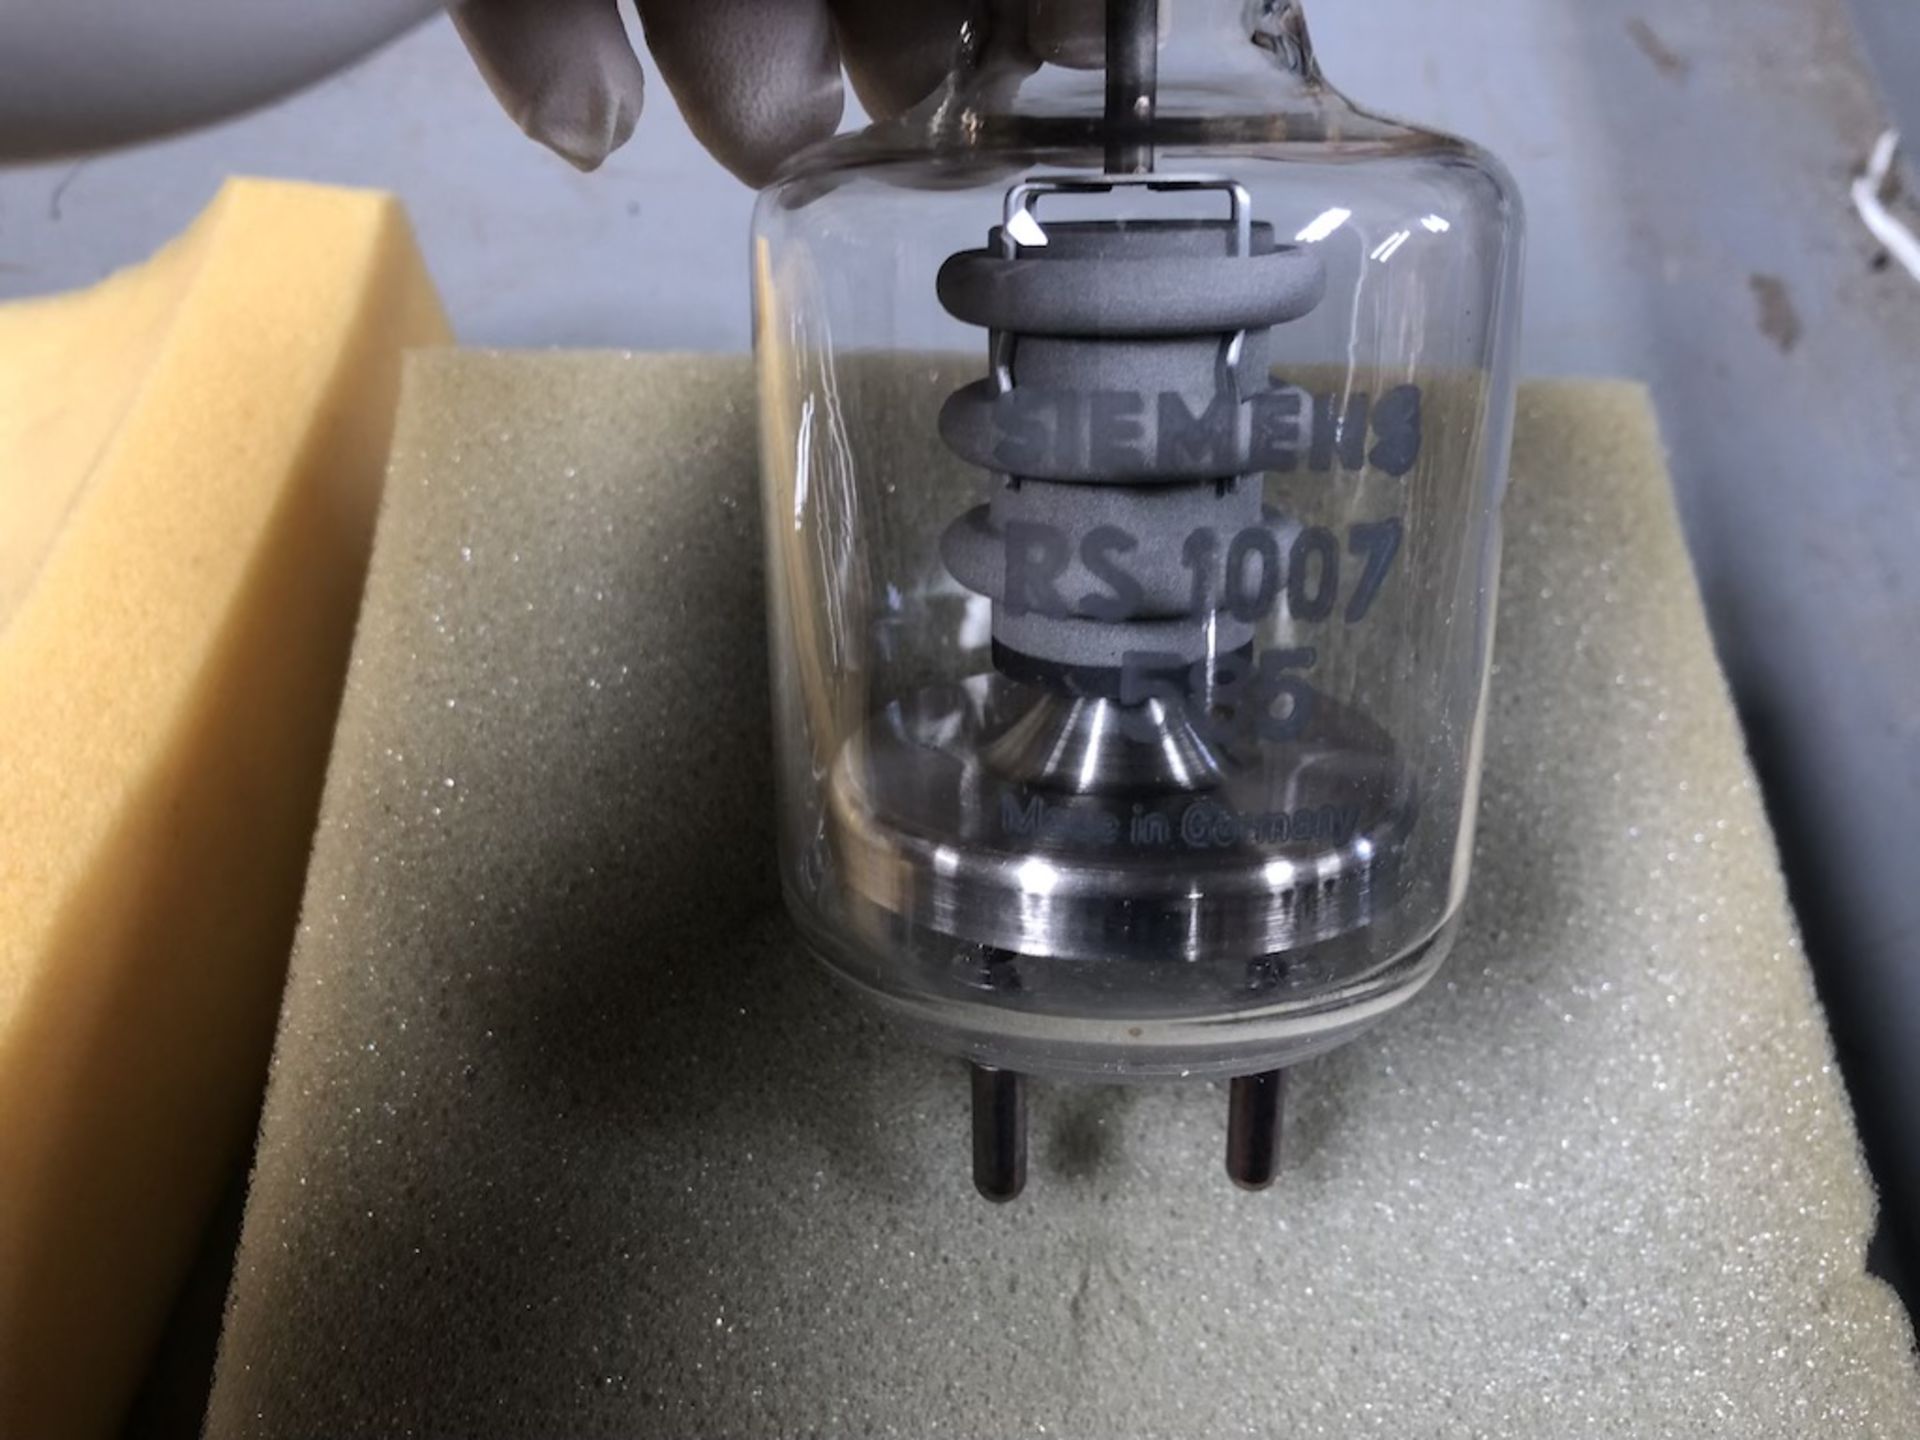 QTY OF 2 ITEMS: SIEMENS RS 1007 VACUUM TUBE; AIO MICRO SERVICE VACUUM TUBE - Image 5 of 6